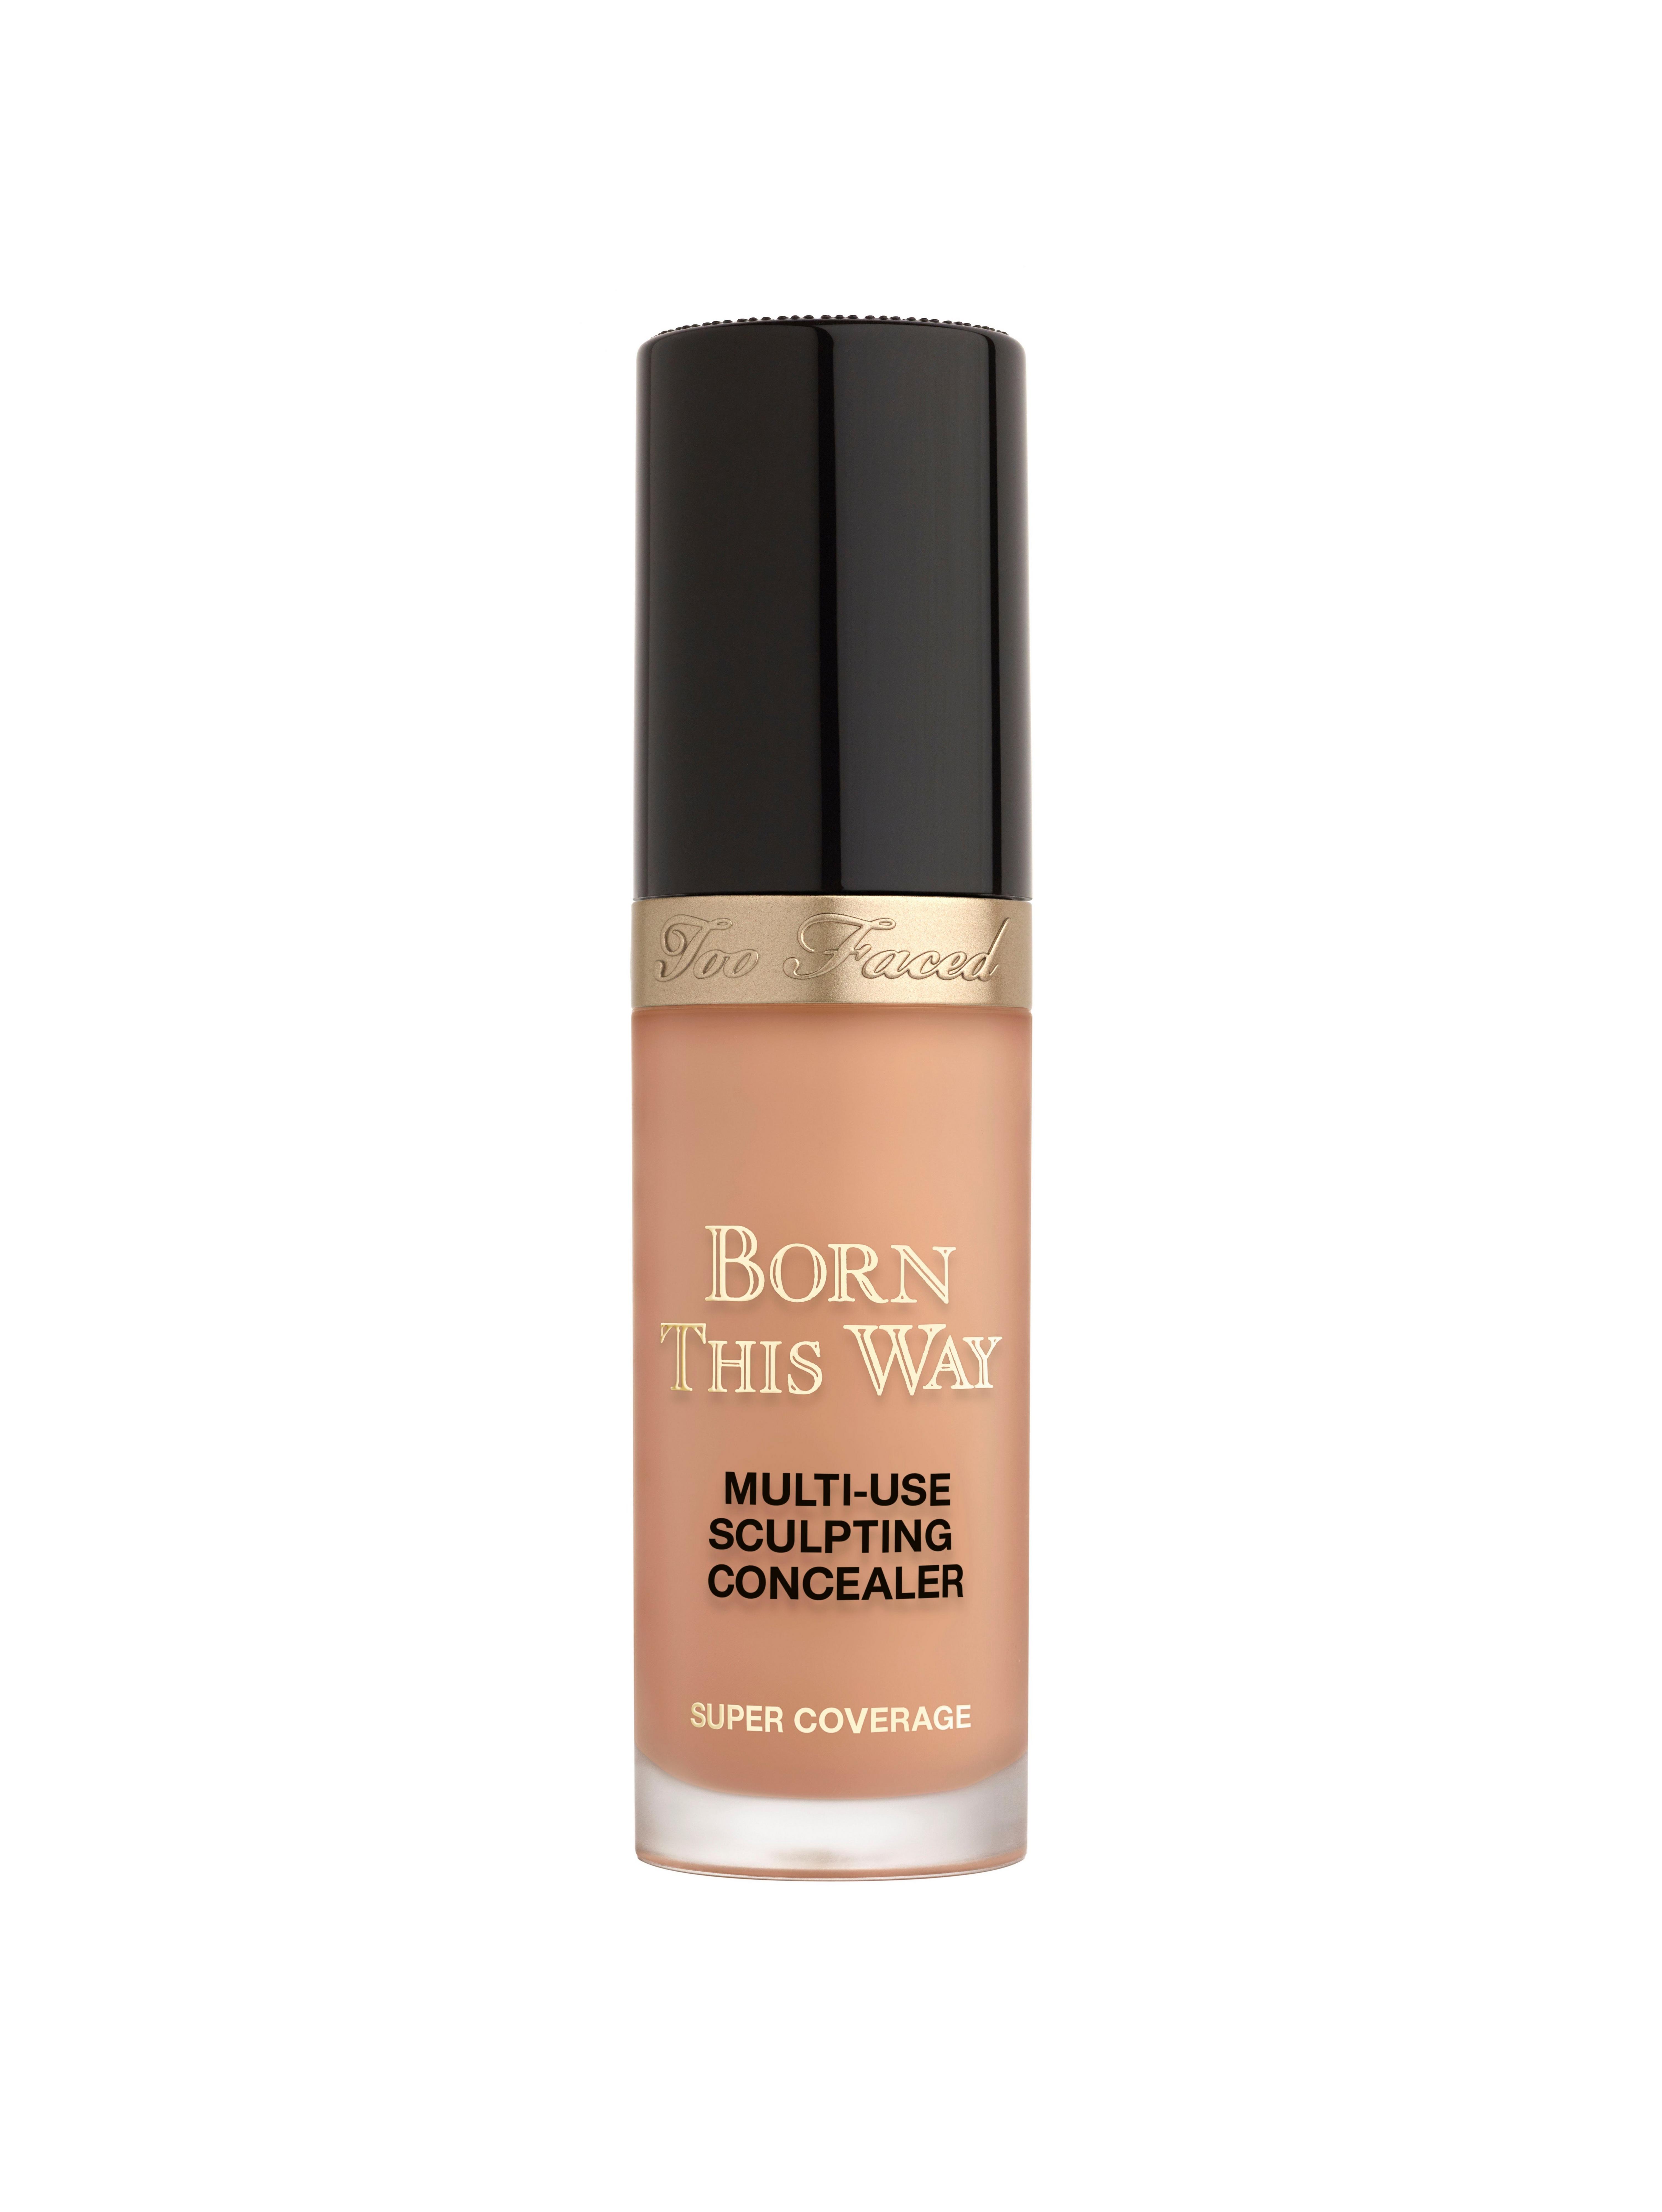 Too Faced BTW SUPER COVERAGE Born This Way Super Coverage 